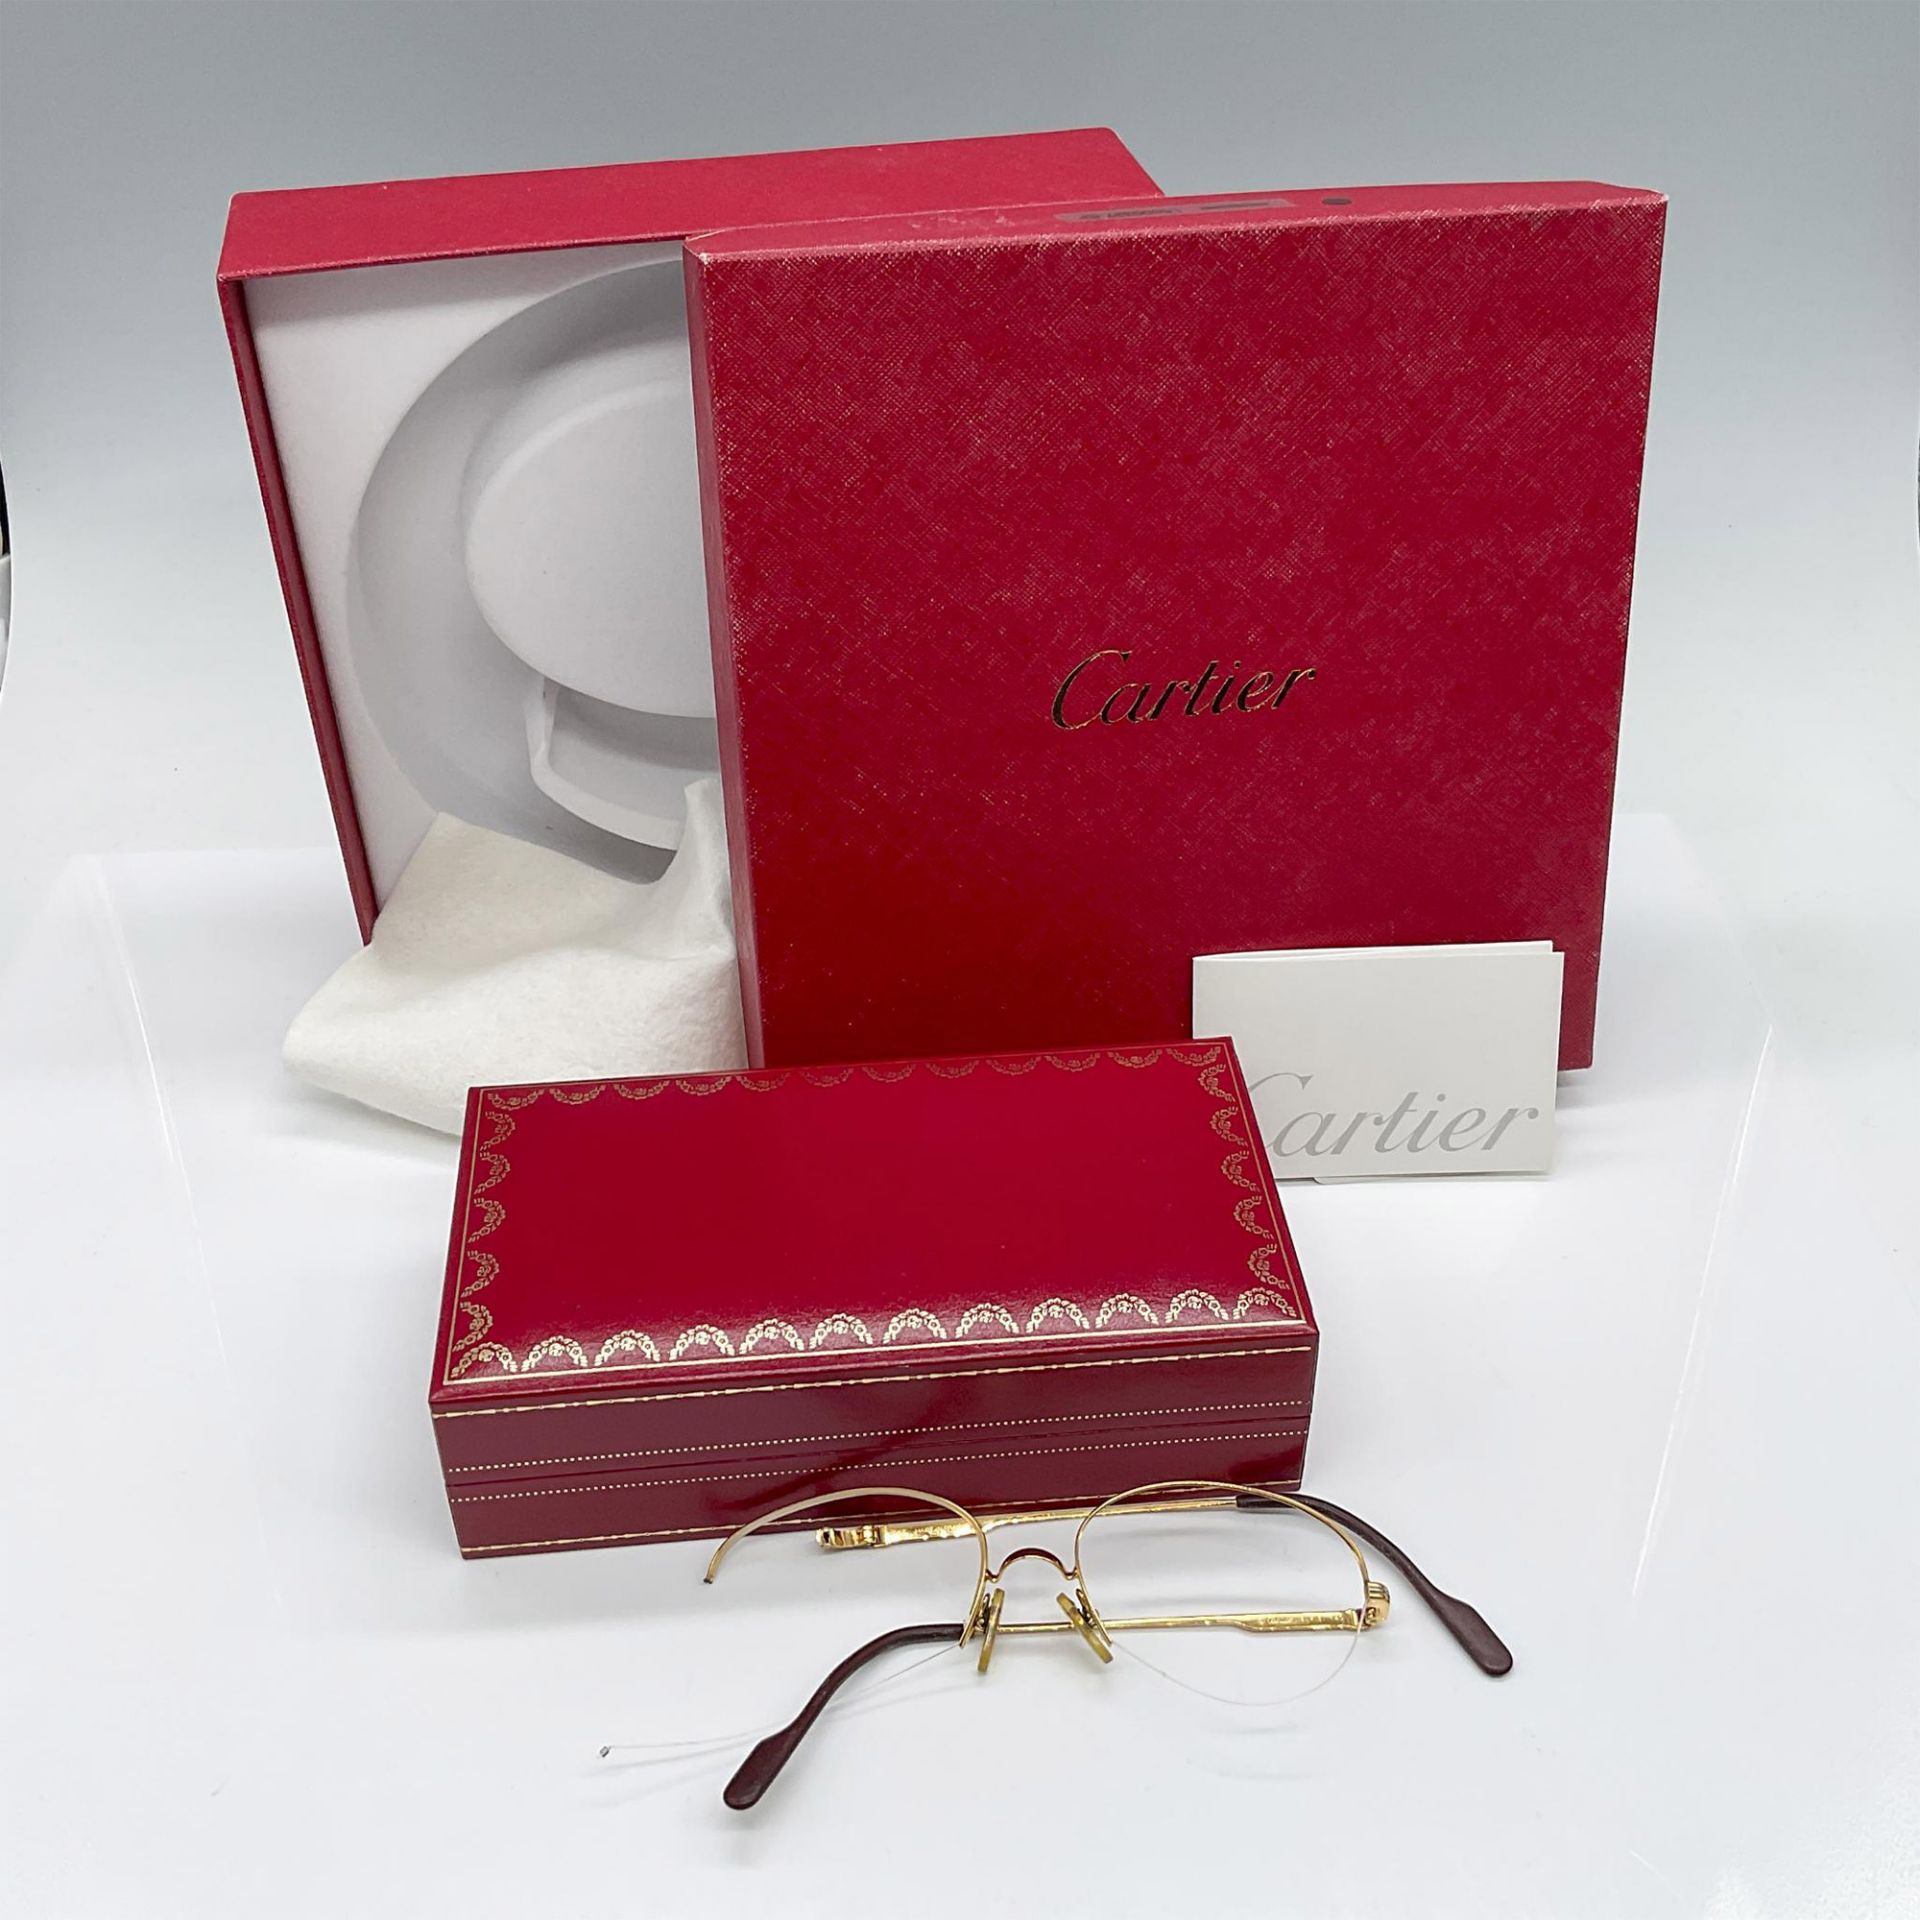 2pc Cartier Eyeglass Frames with Cartier Boxes - Image 2 of 3